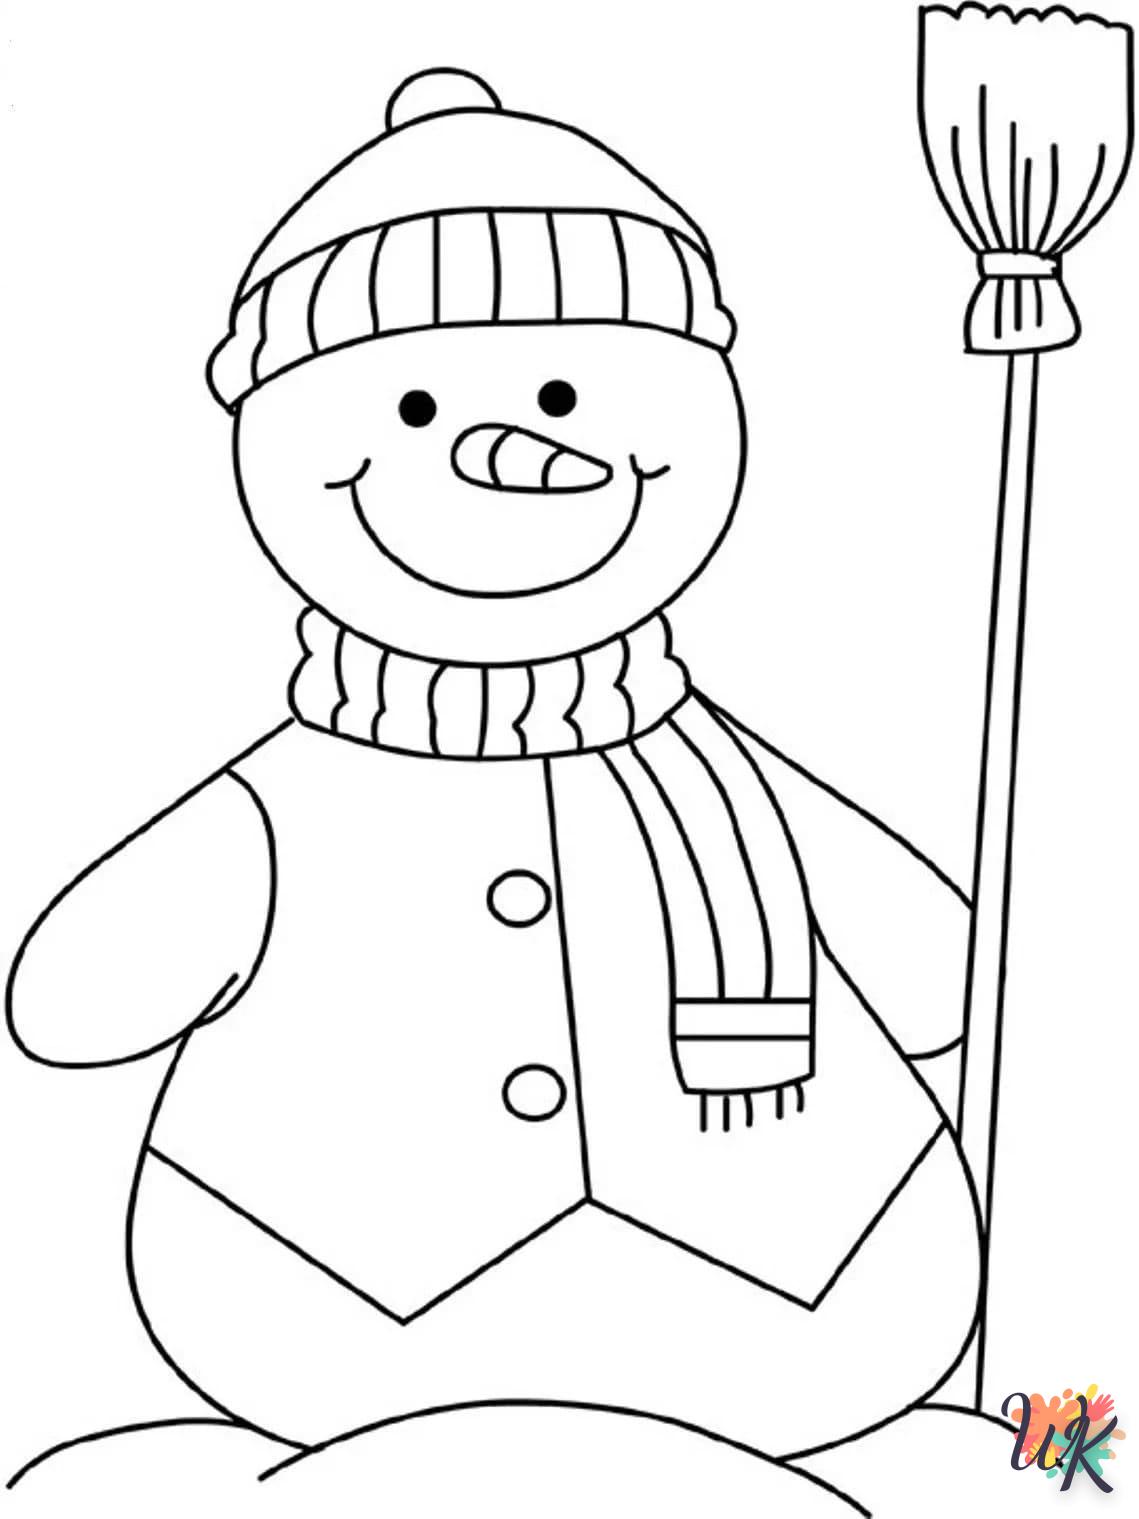 Snowman coloring online free